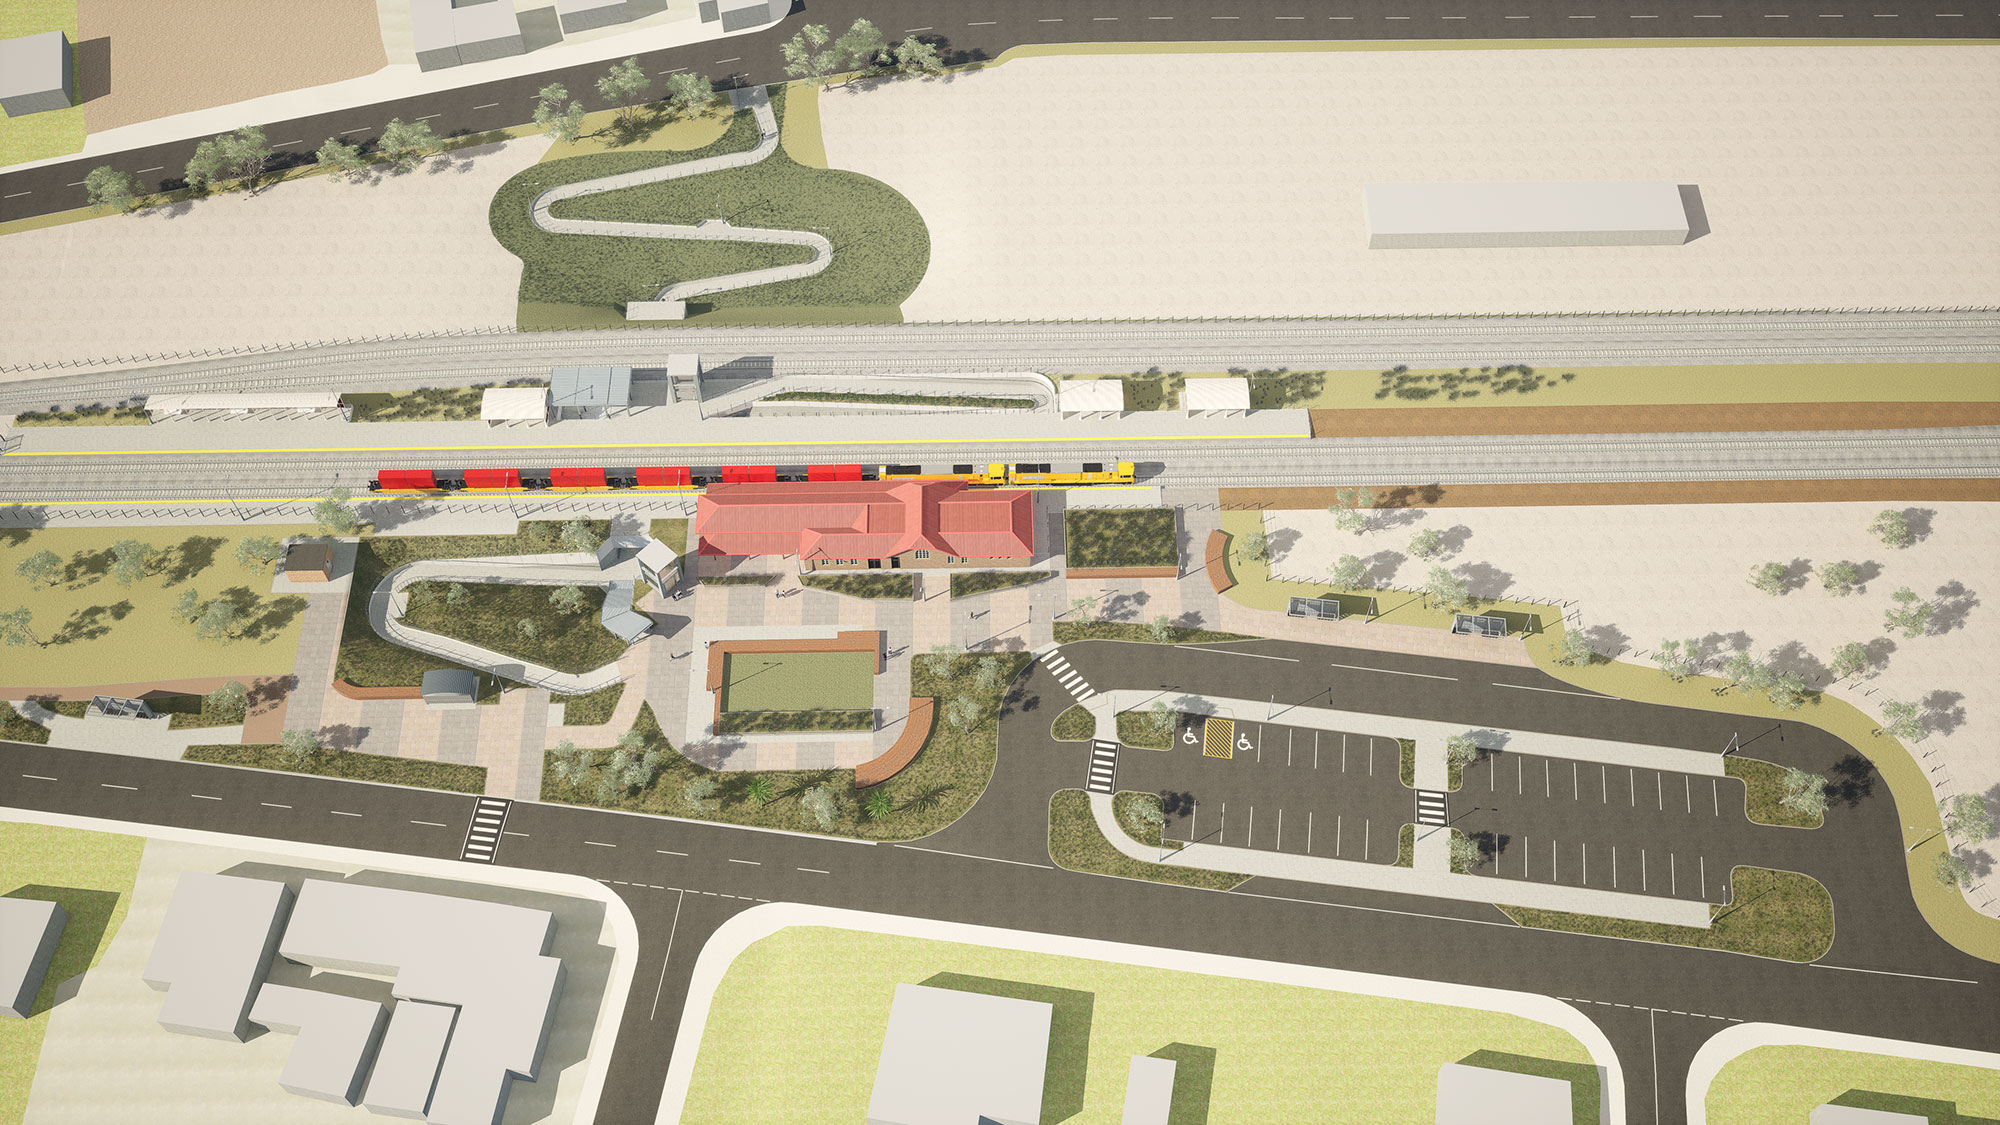 Visualisation of the overview of Benalla Station Precinct